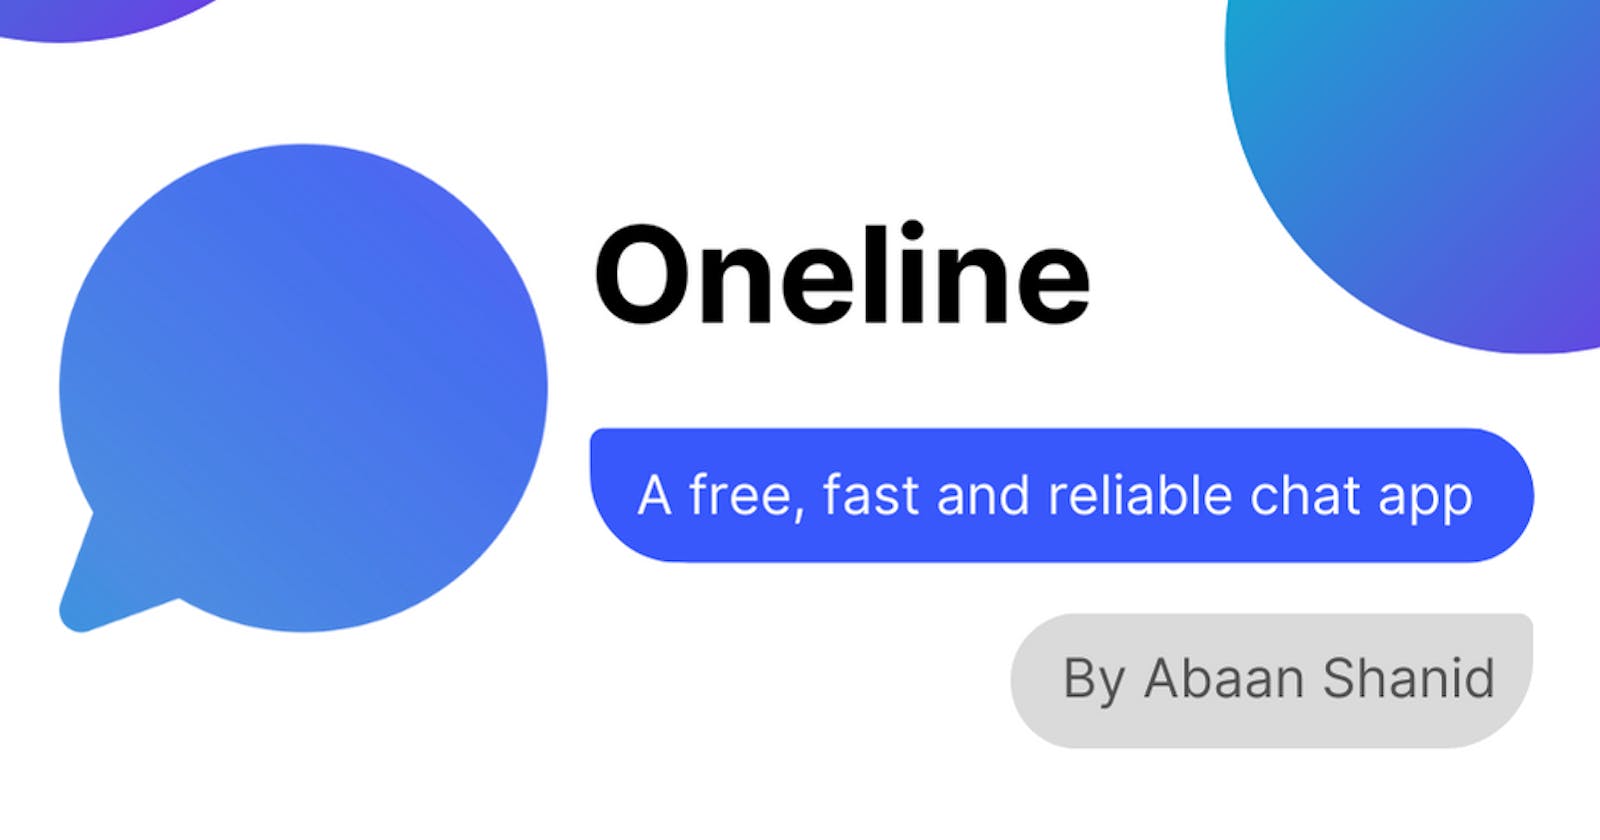 Oneline, a free, fast and reliable chat app